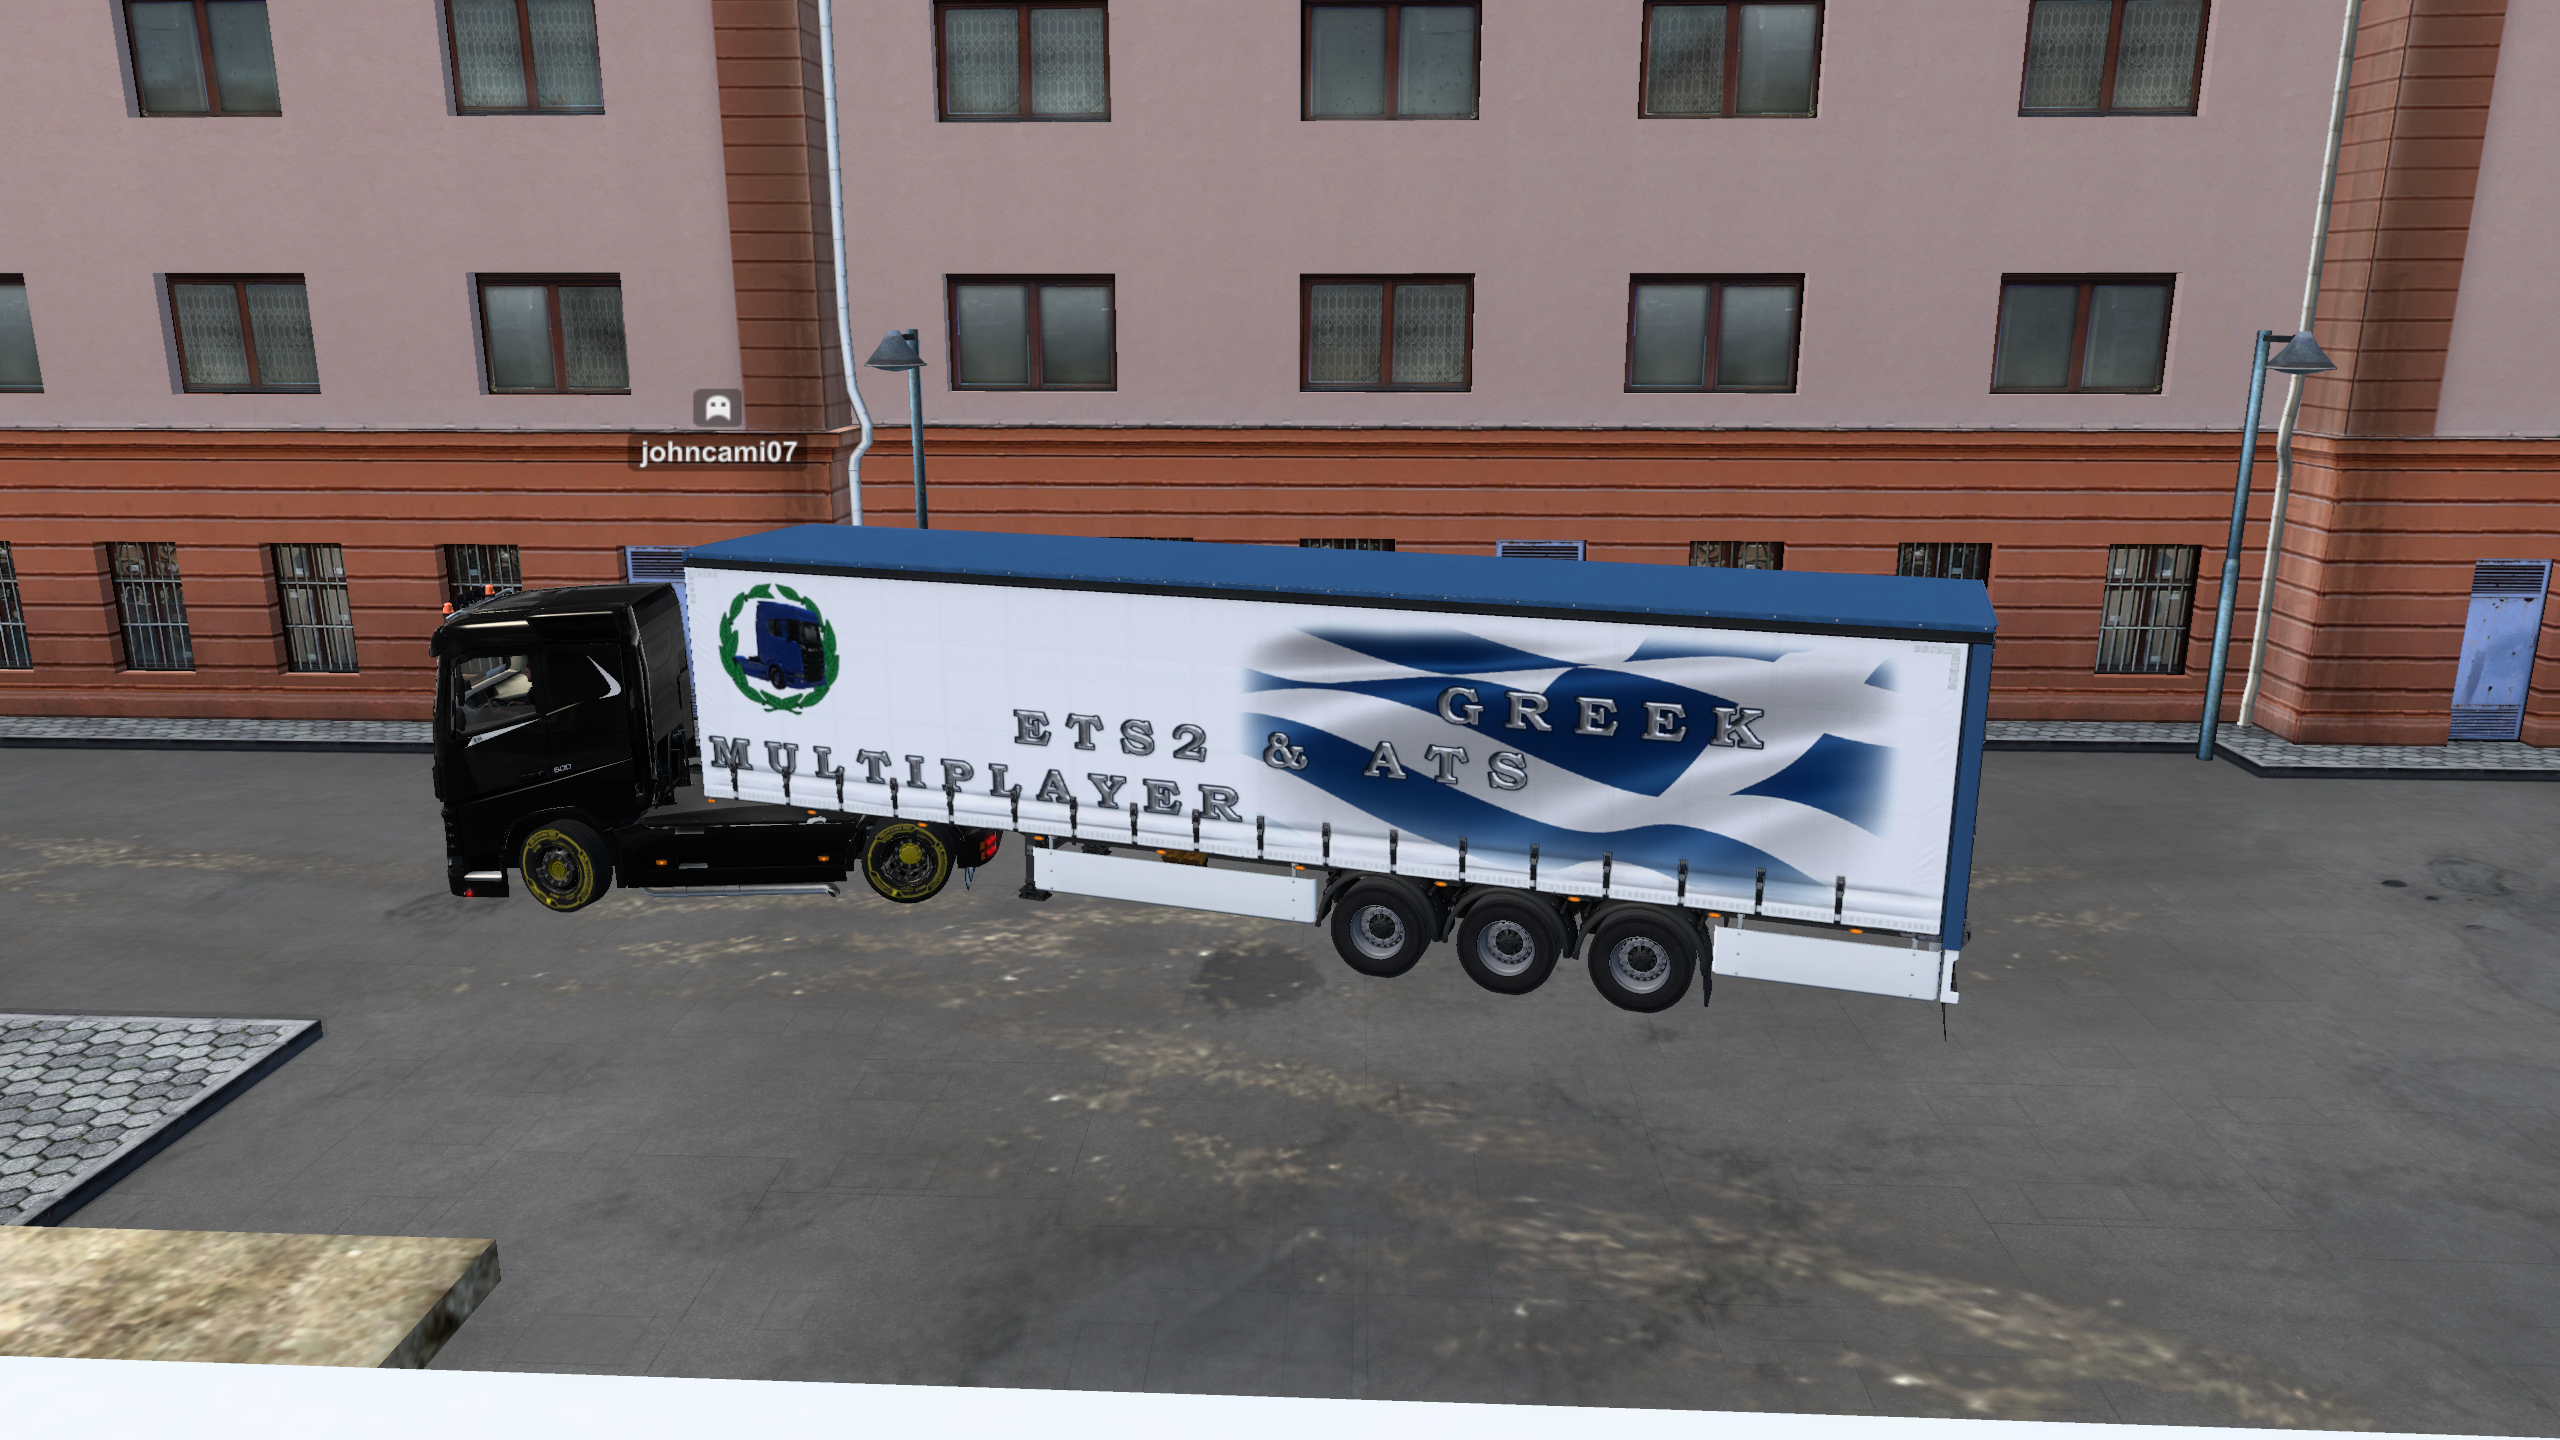 ets2_20220223_222012_00.png